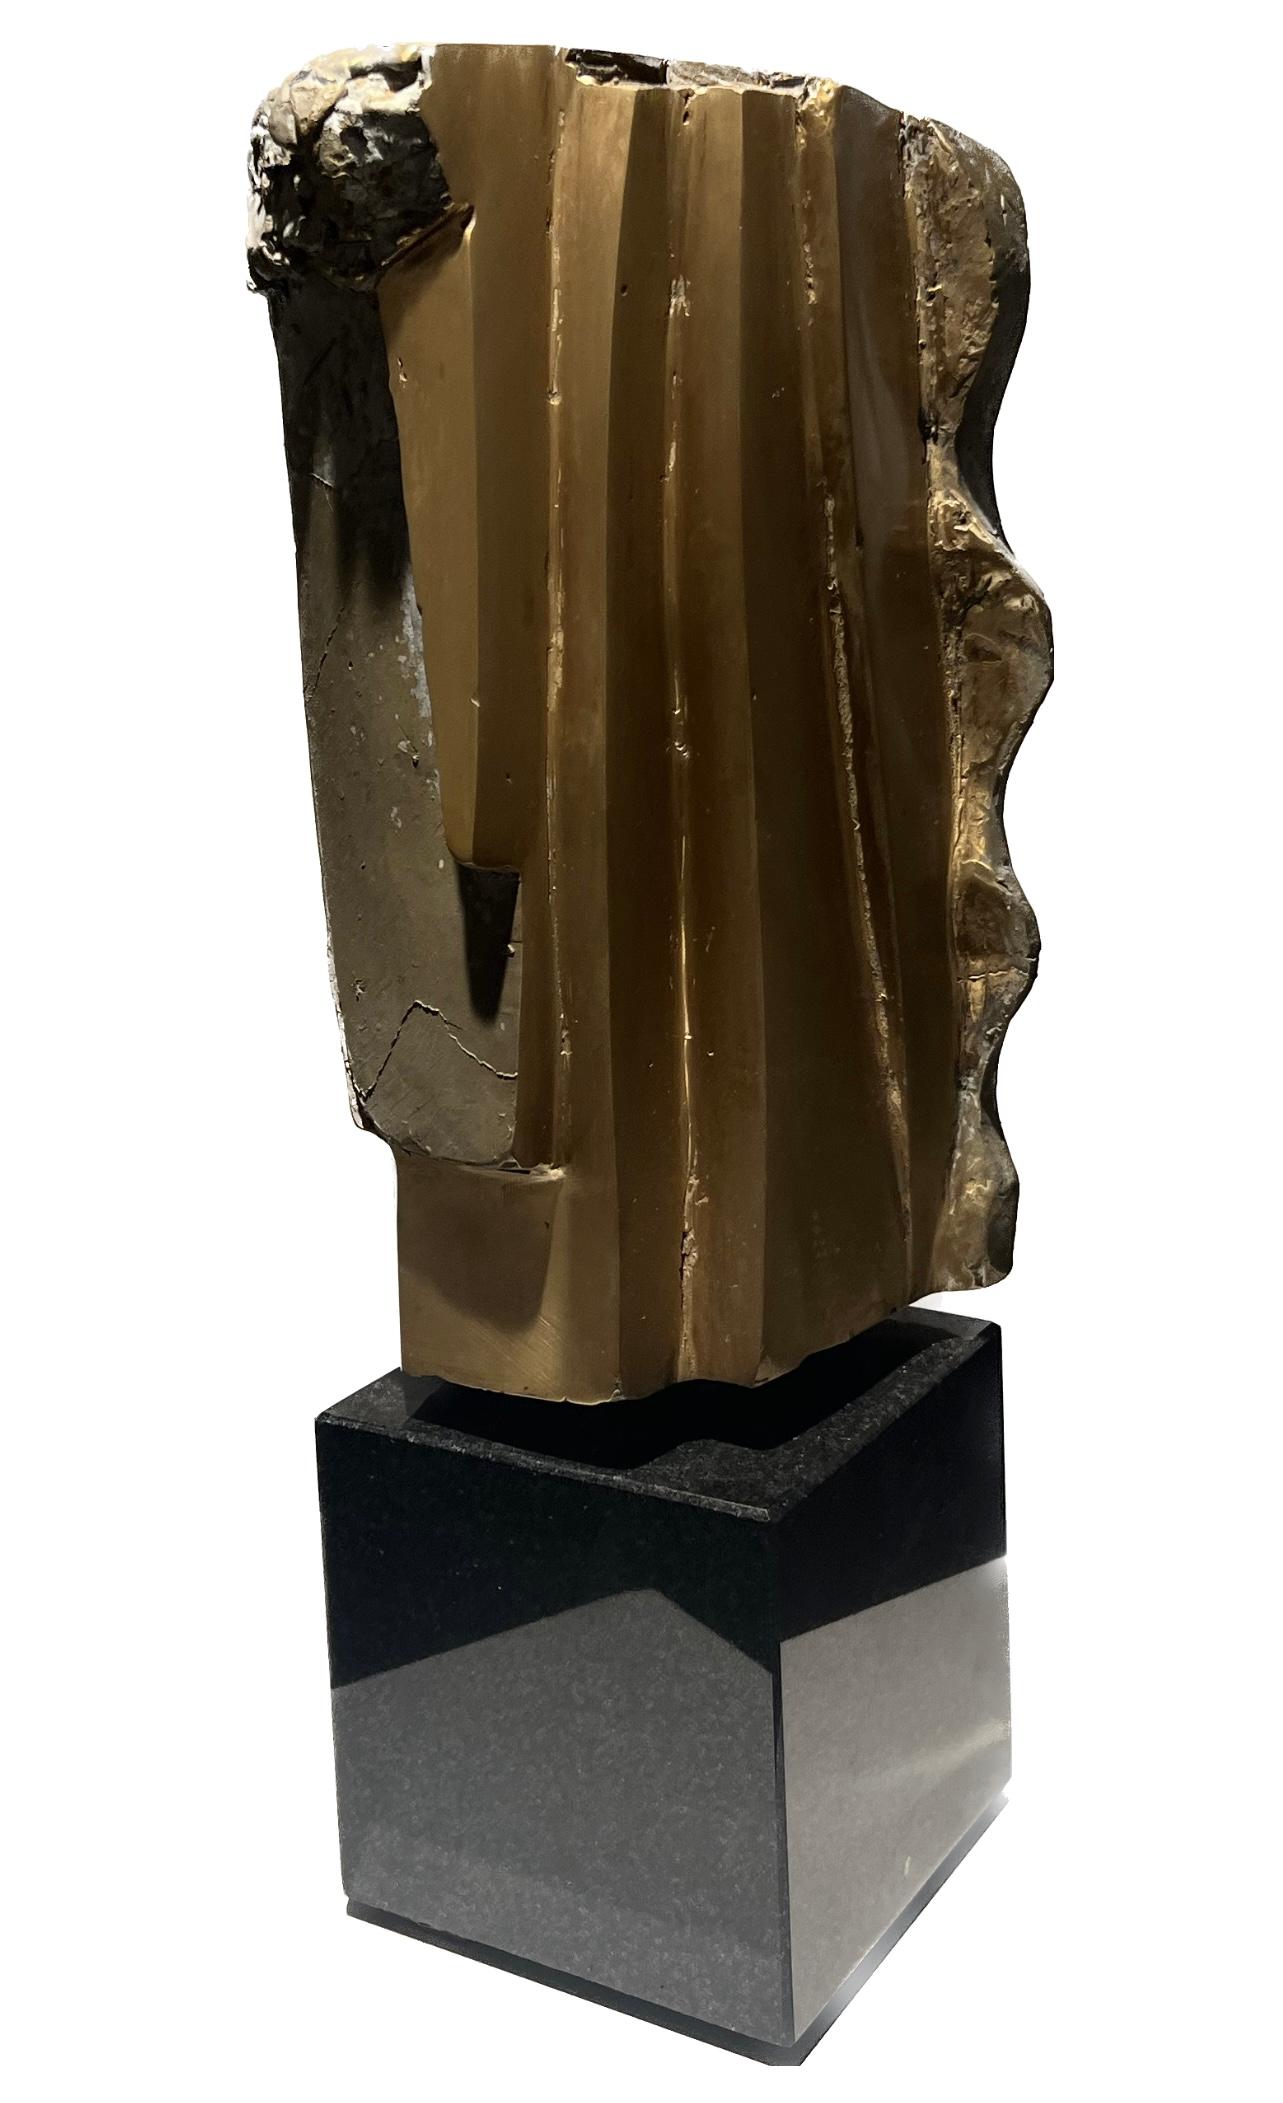 Little Abstract Head no. 10 Bronze Sculpture Polished Portrait  In Stock Limited Edition

Junghans (1956, Recklinghausen) creates abstract sculptures in stone, wood and bronze, mostly torsos and primal portraits, in a primitive, cubic and